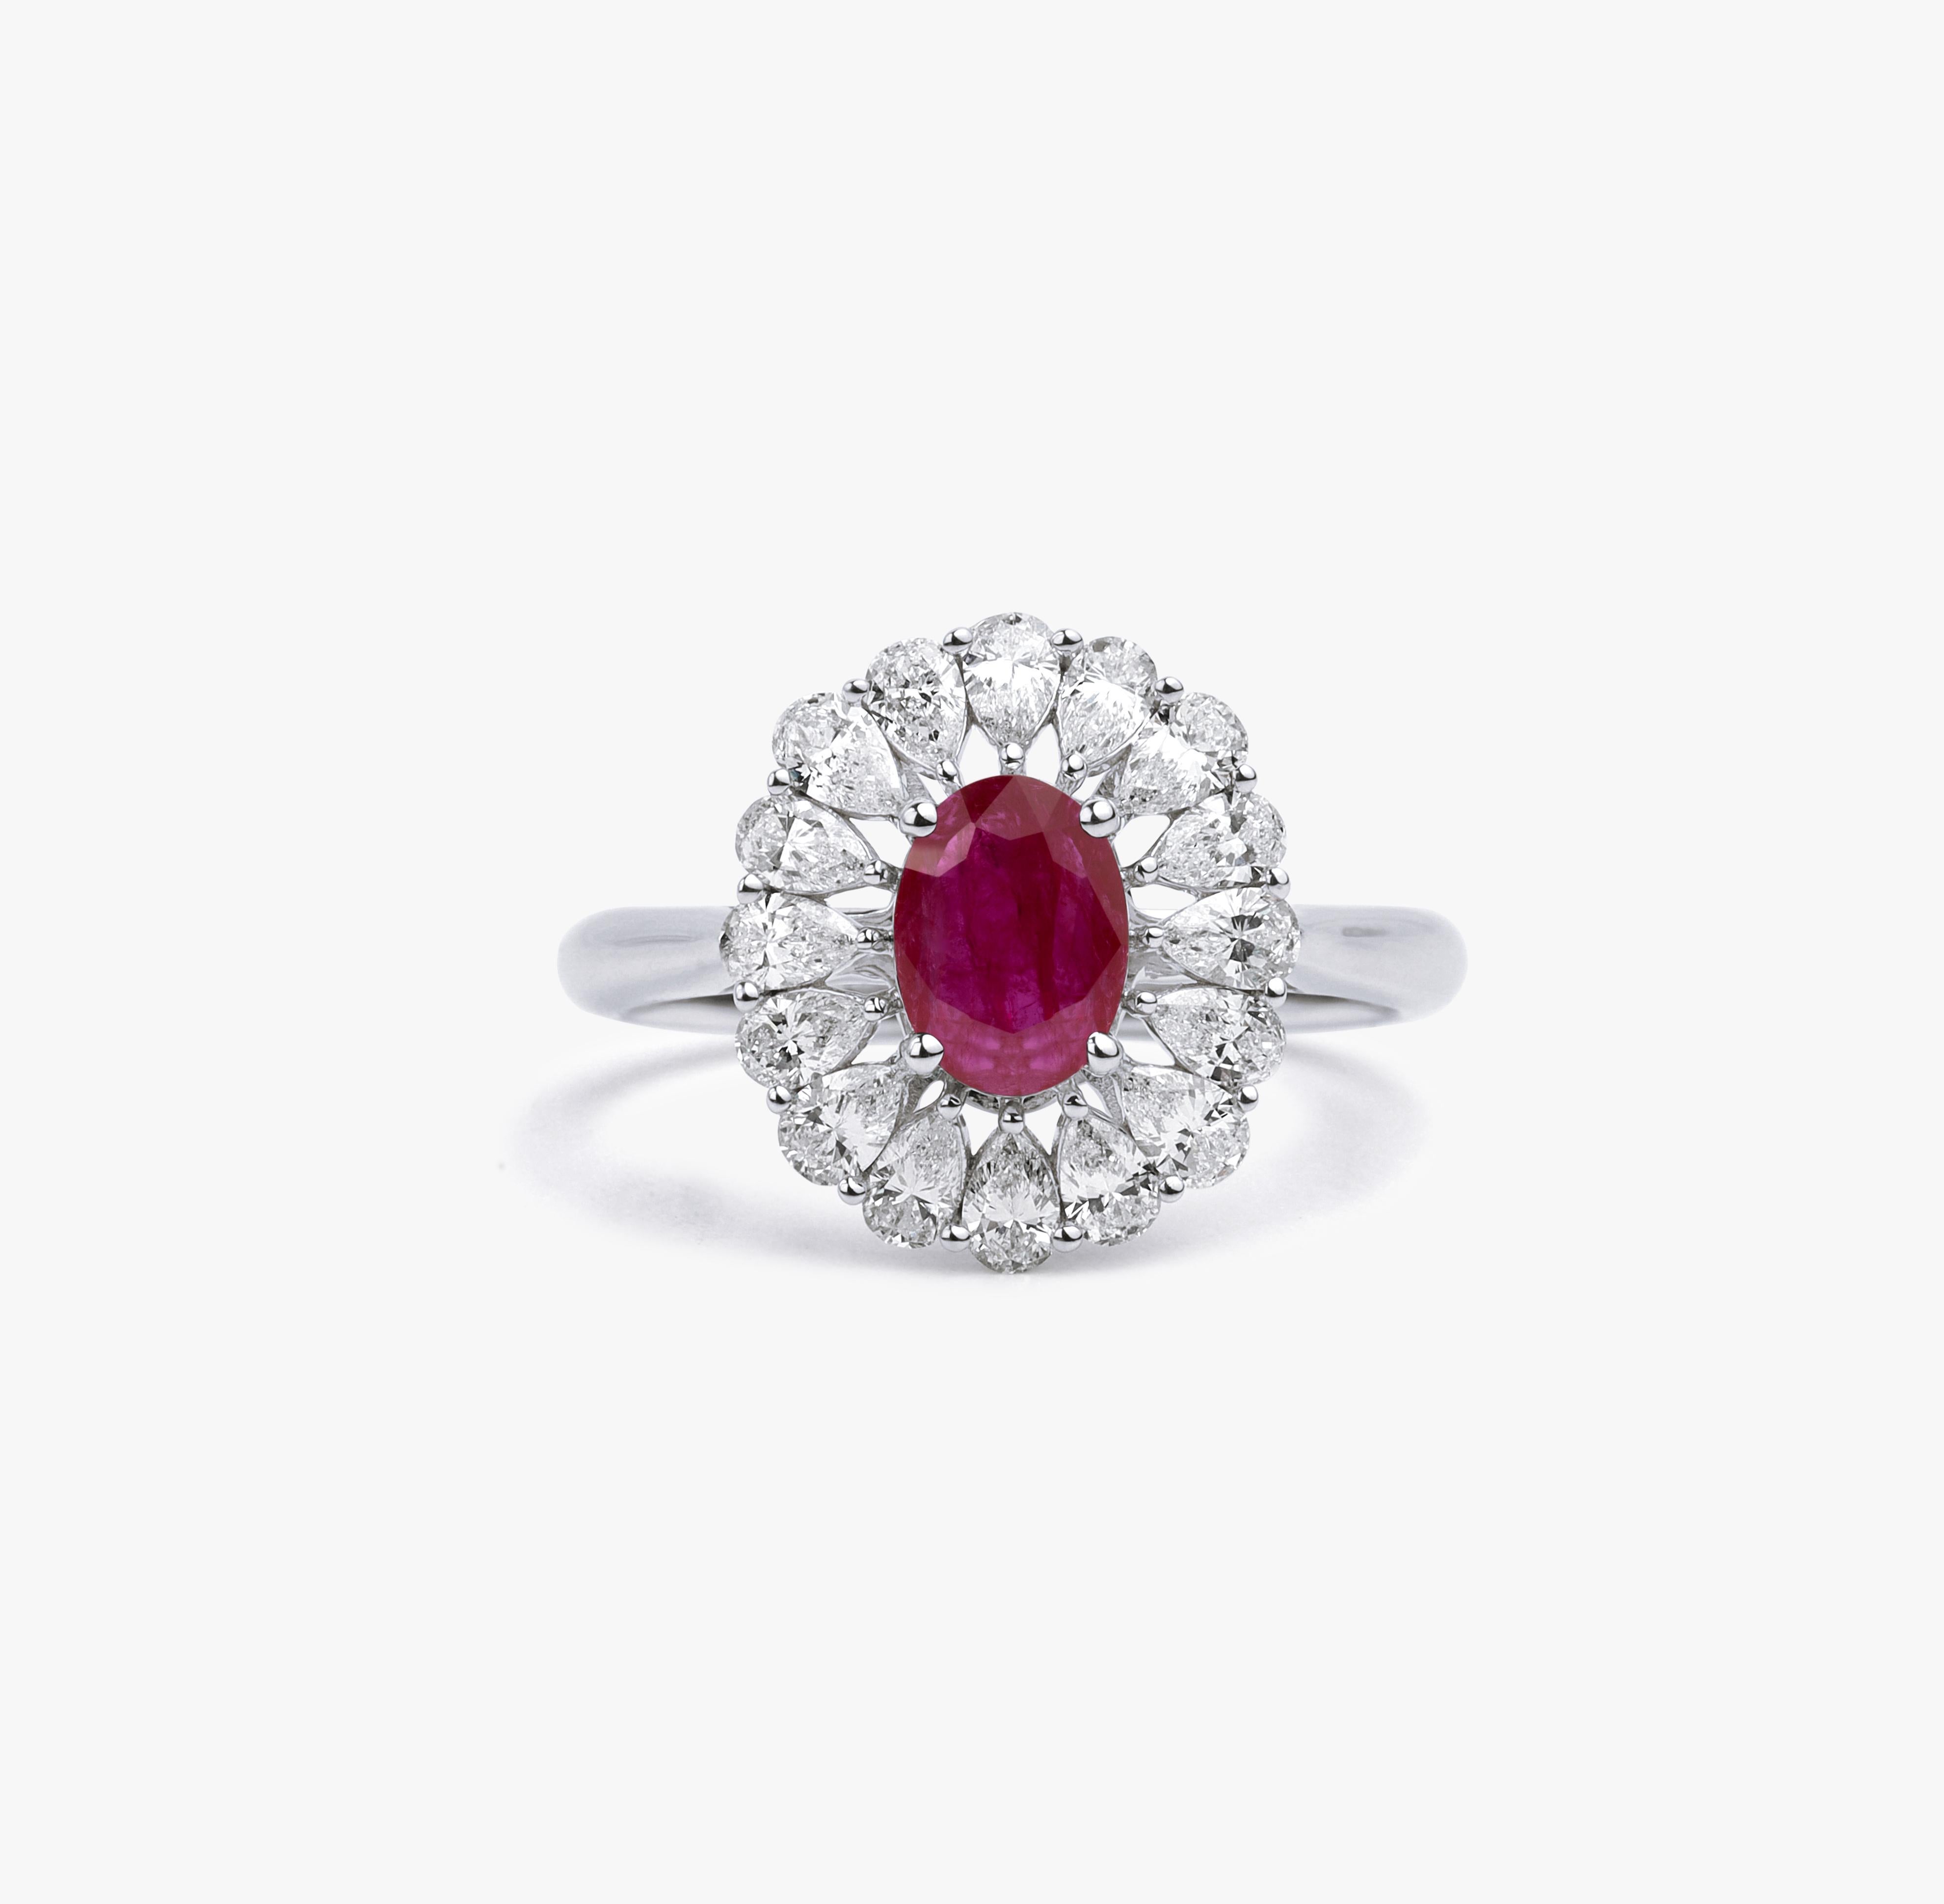 Oval Red Ruby Diamond Pear Cut Halo Cocktail Engagement Ring in White Gold

Available in 18k white gold.

Same design can be made also with other custom gemstones per request.

Product details:

- Solid gold

- Diamond - approx. 1.04 carat

- Ruby -